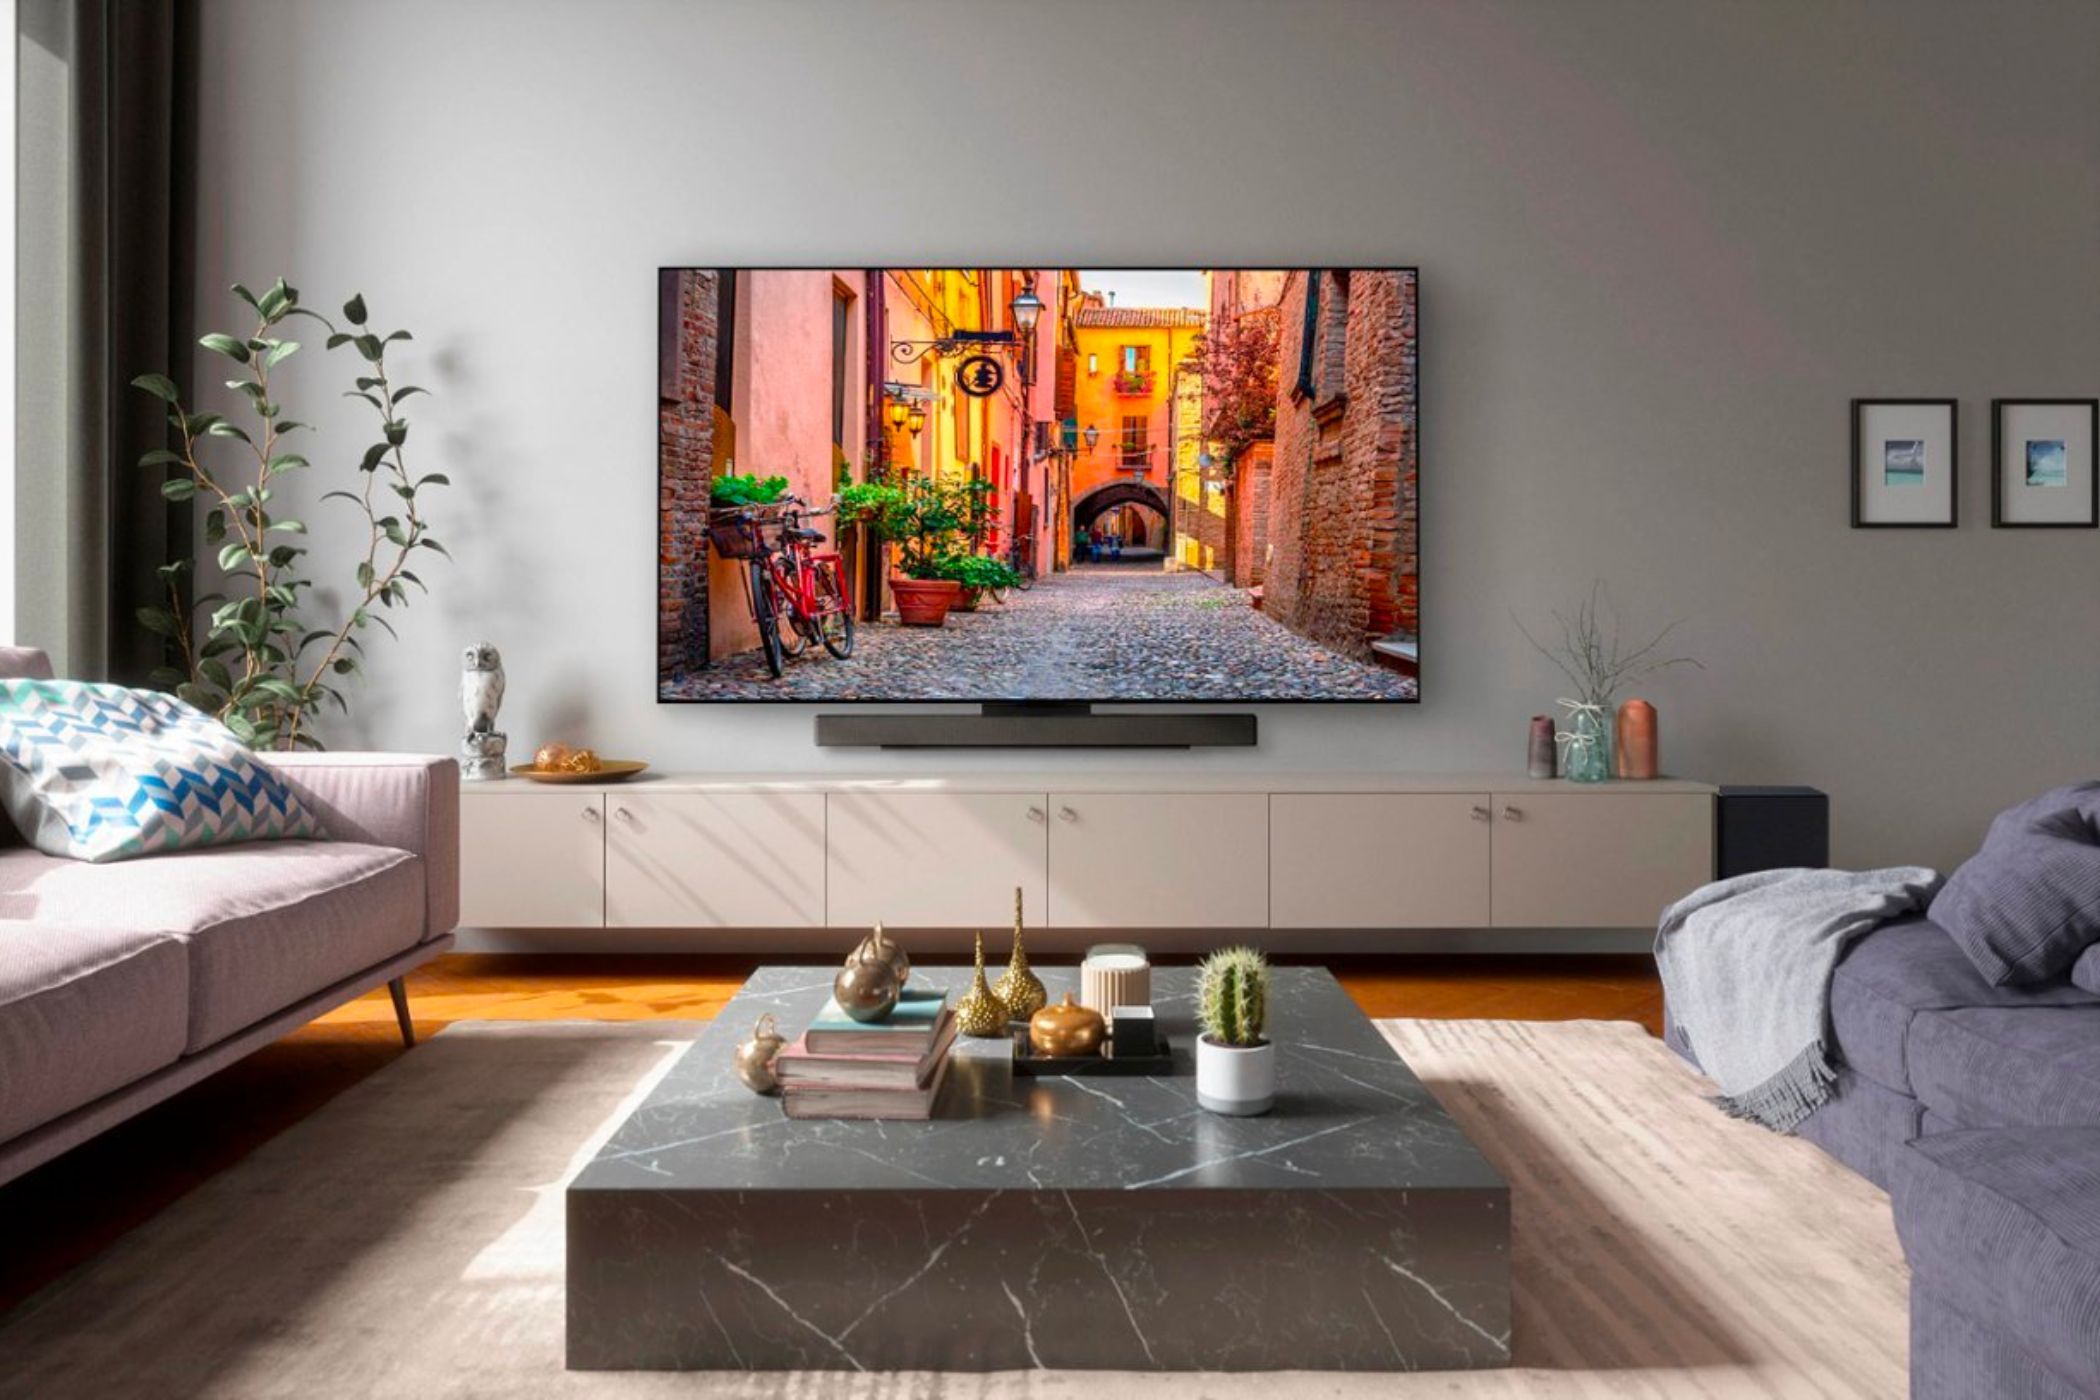 An image showing the LG C3 OLED TV mounted on a wall in a living room with couches and other furniture.